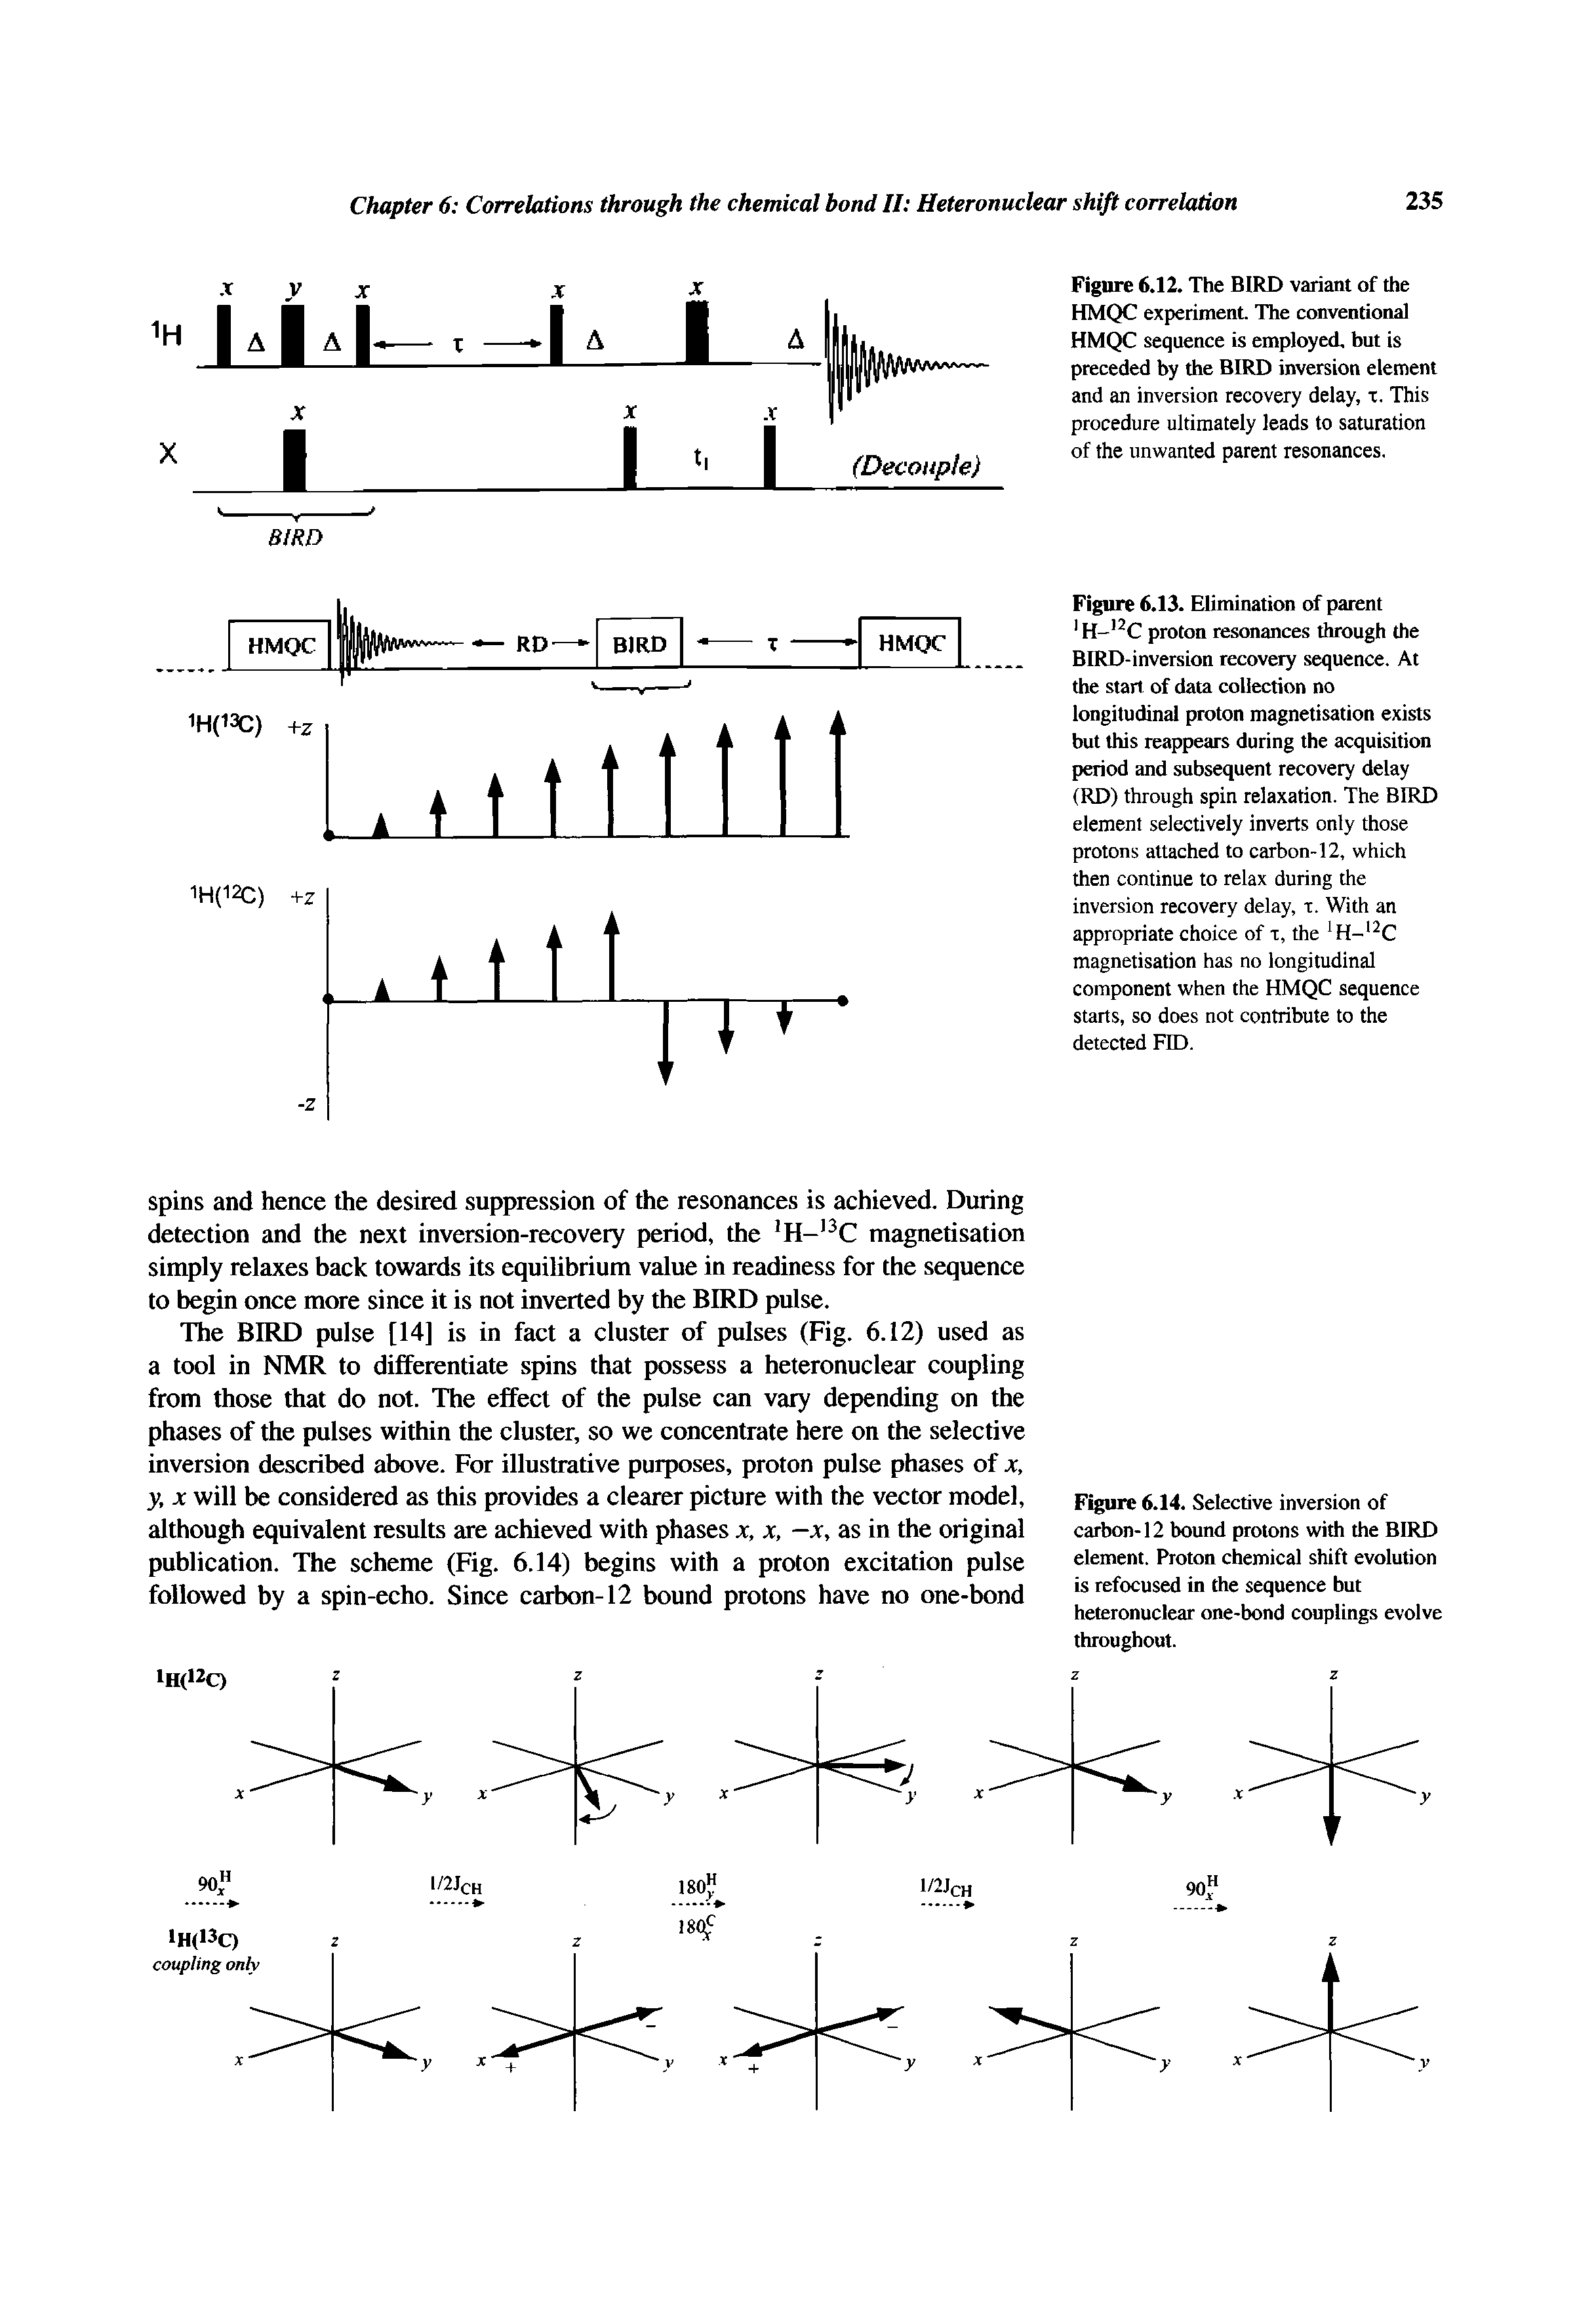 Figure 6.12. The BIRD variant of the HMQC experiment. The conventional HMQC sequence is employed, but is preceded by the BIRD inversion element and an inversion recovery delay, t. This procedure ultimately leads to saturation of the unwanted parent resonances.